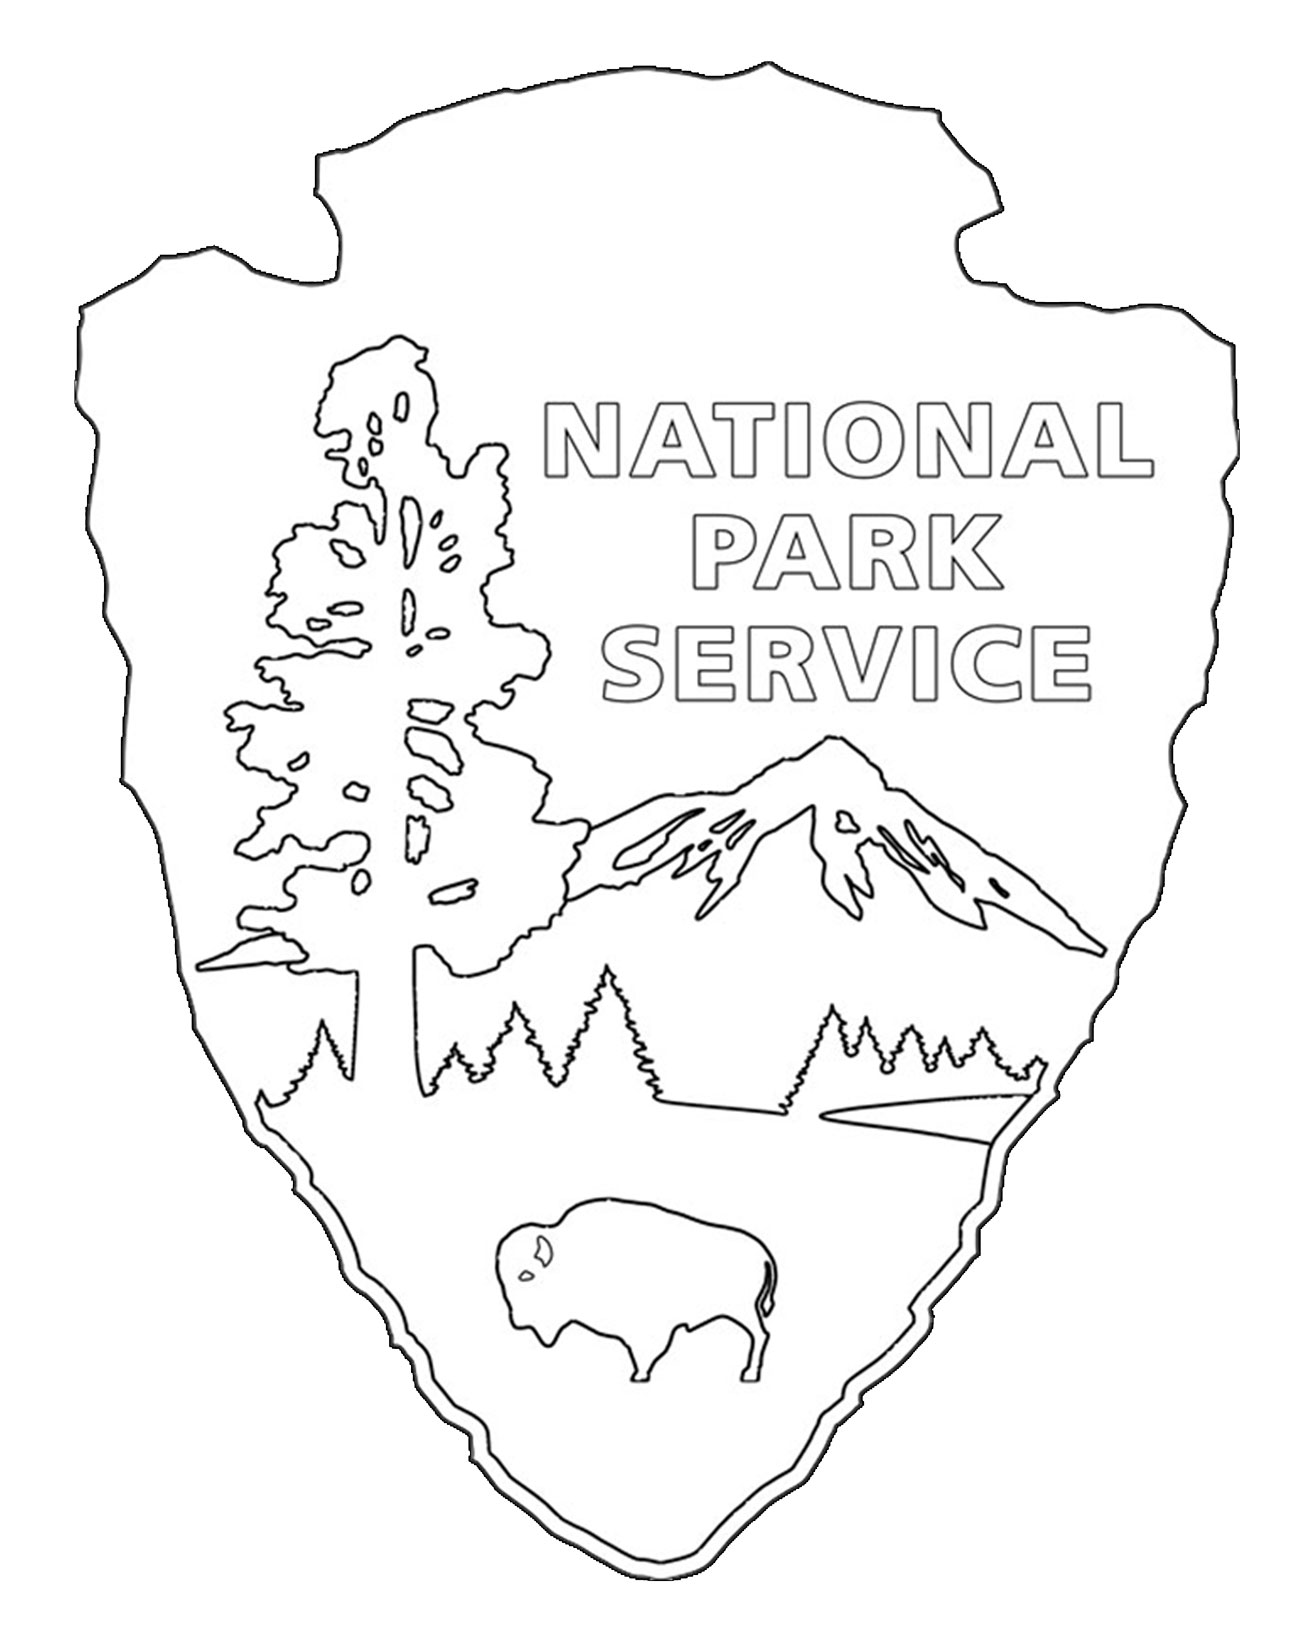 Black and white outline of National Park Service emblem featuring a bison on the bottom, landscape of trees and mountains above, and National Park Service text on upper right